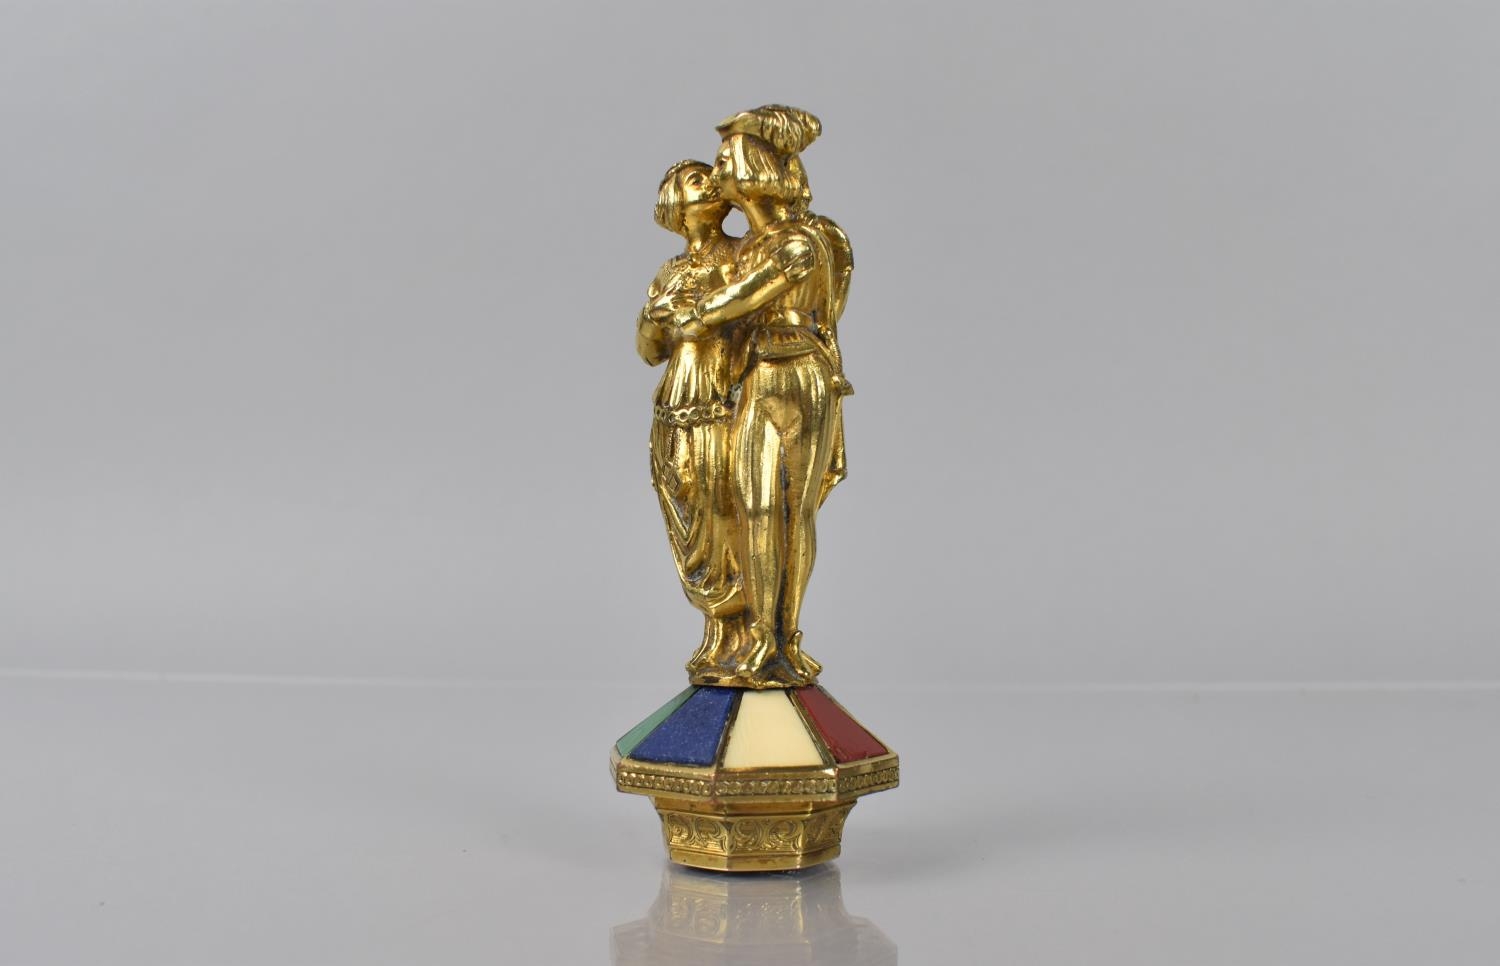 A 19th Century Gilt Metal Seal formed as Three Romantic Figures in an Embrace on Octagonal Base - Image 2 of 7